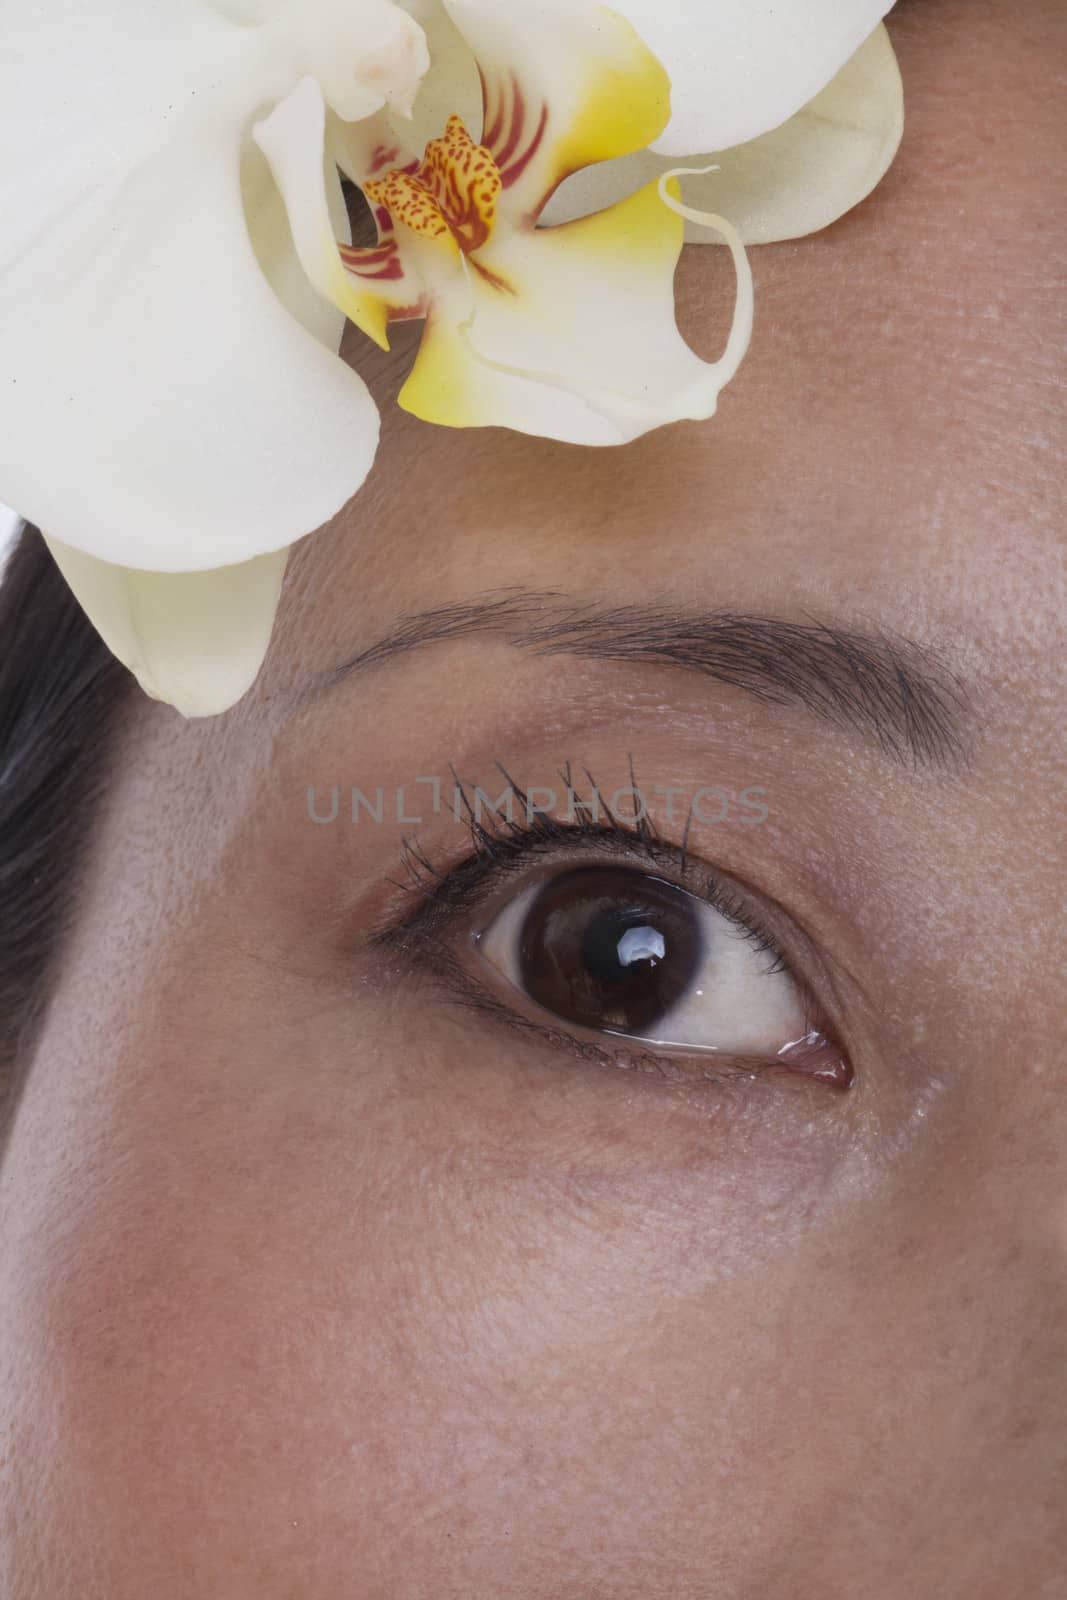 Extreme close up of eye and a white flower, studio shot